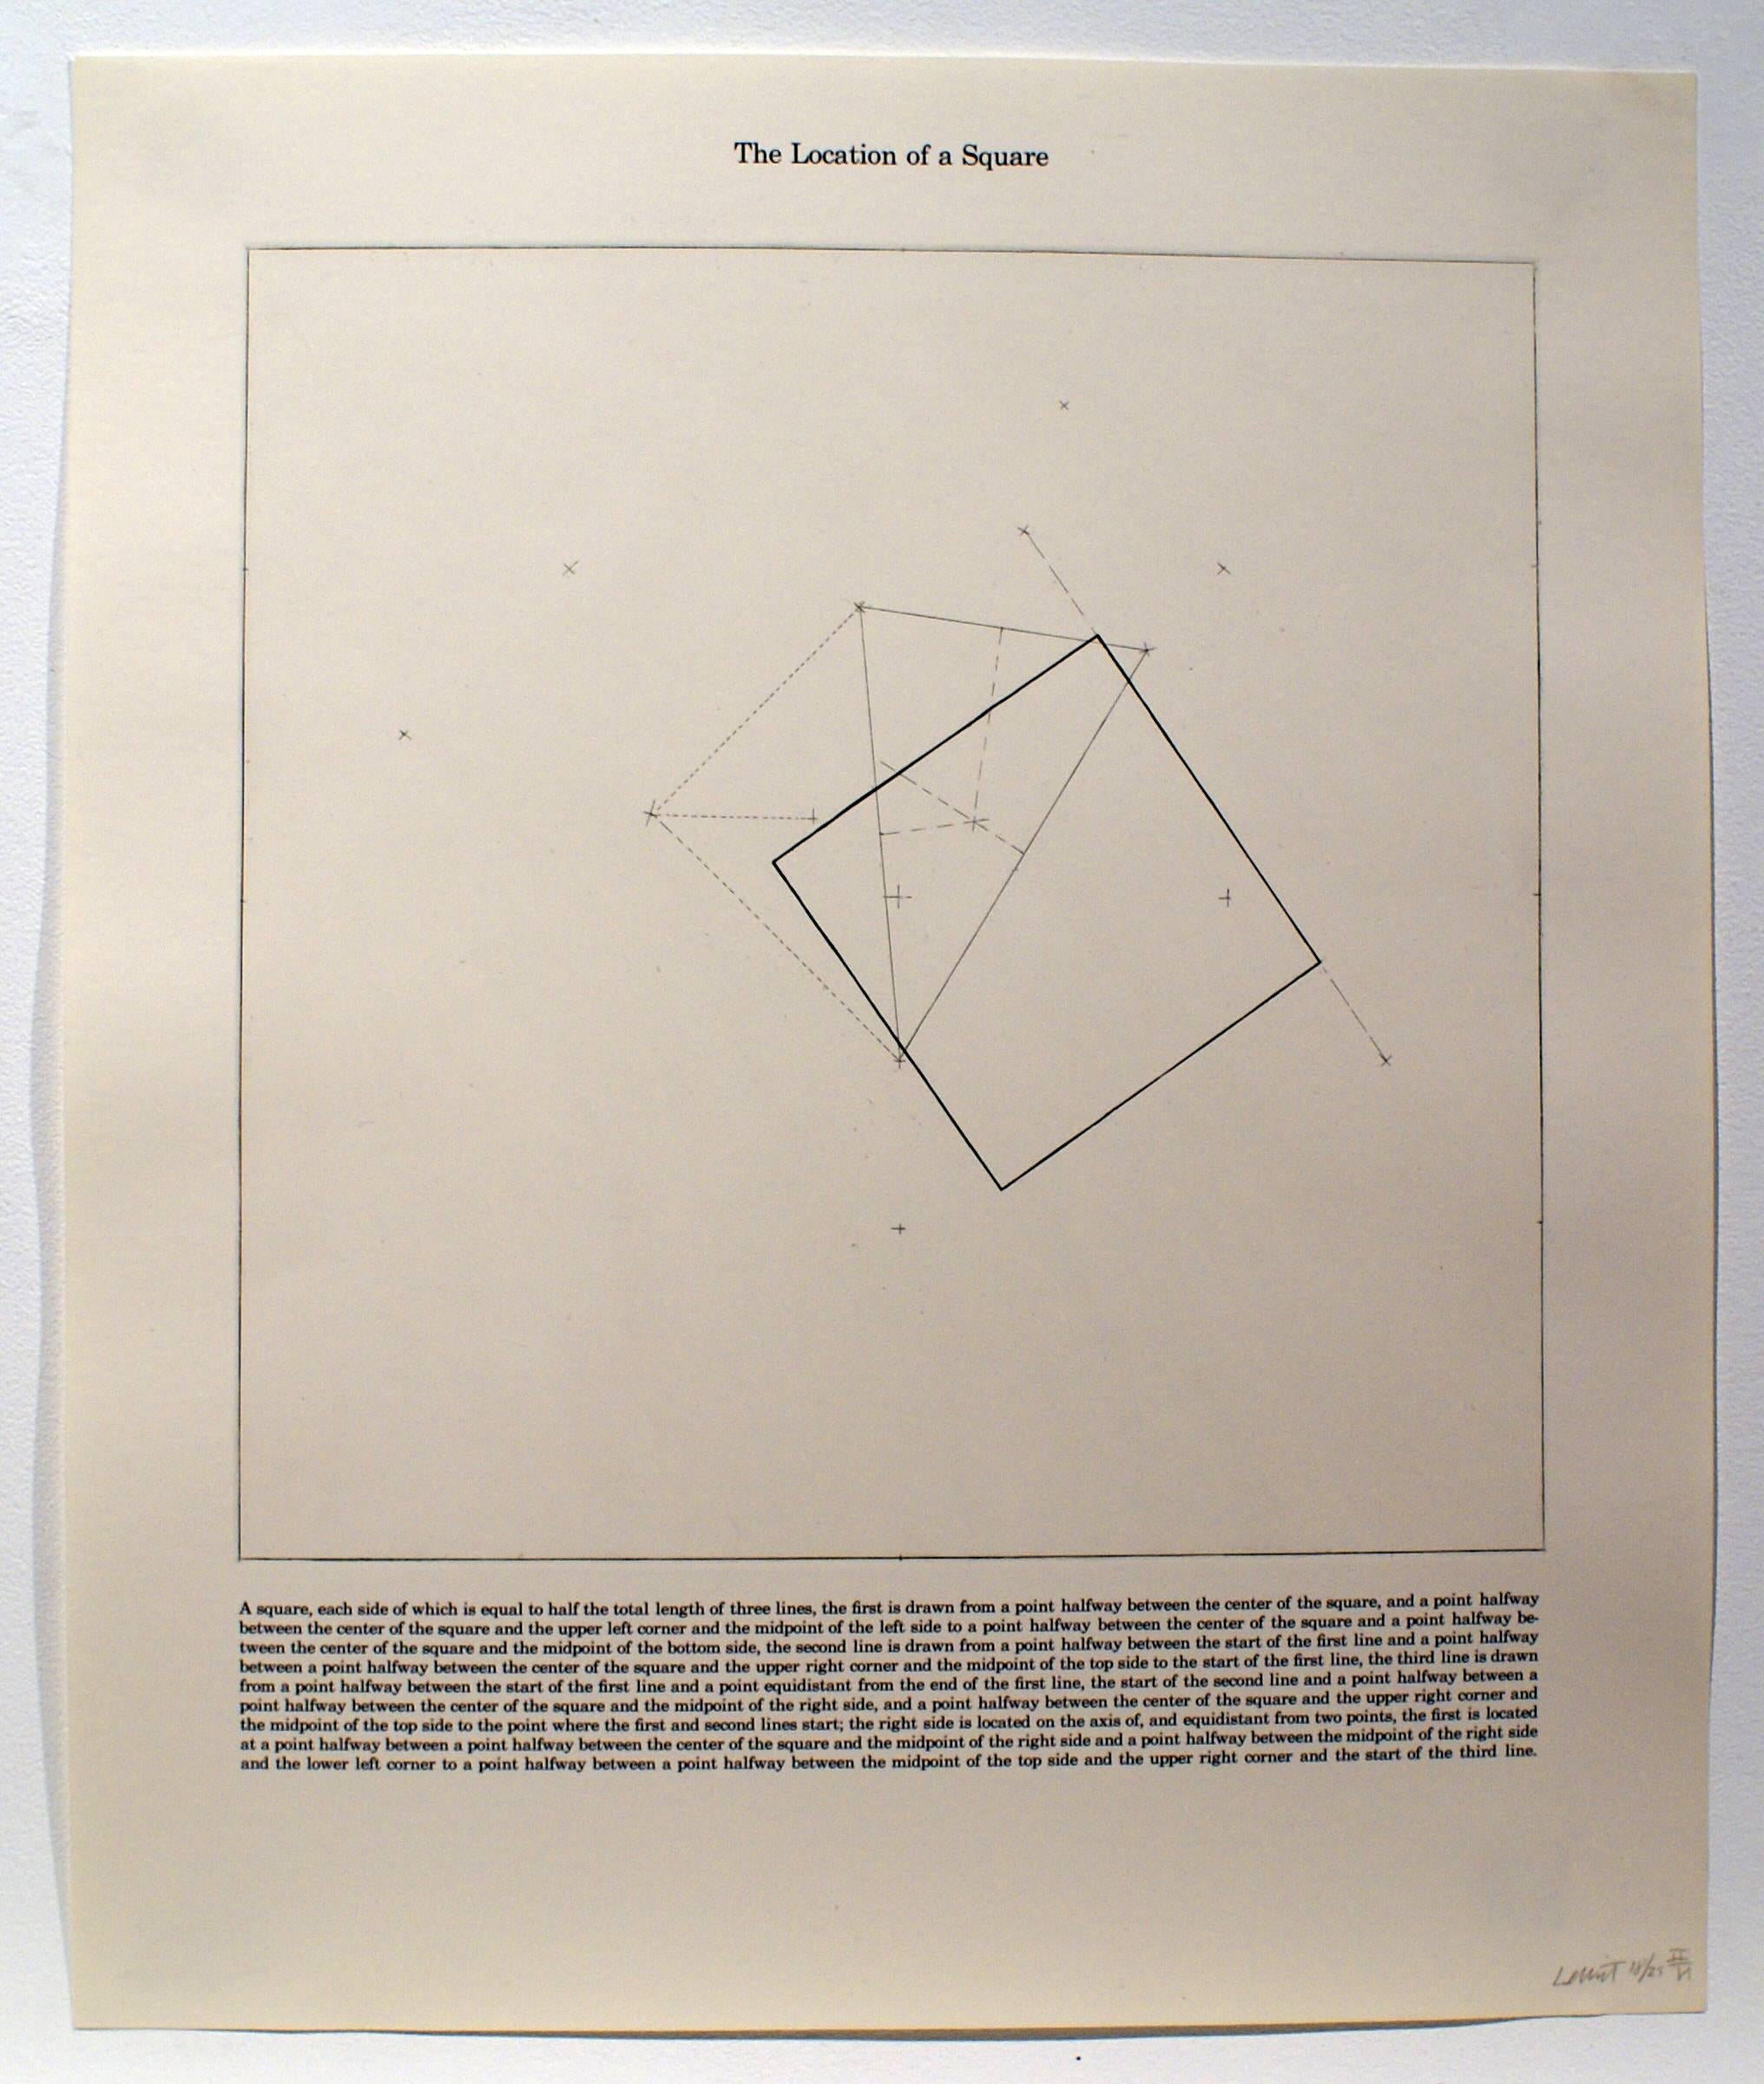 Sol LeWitt Abstract Print - The Location of a Square